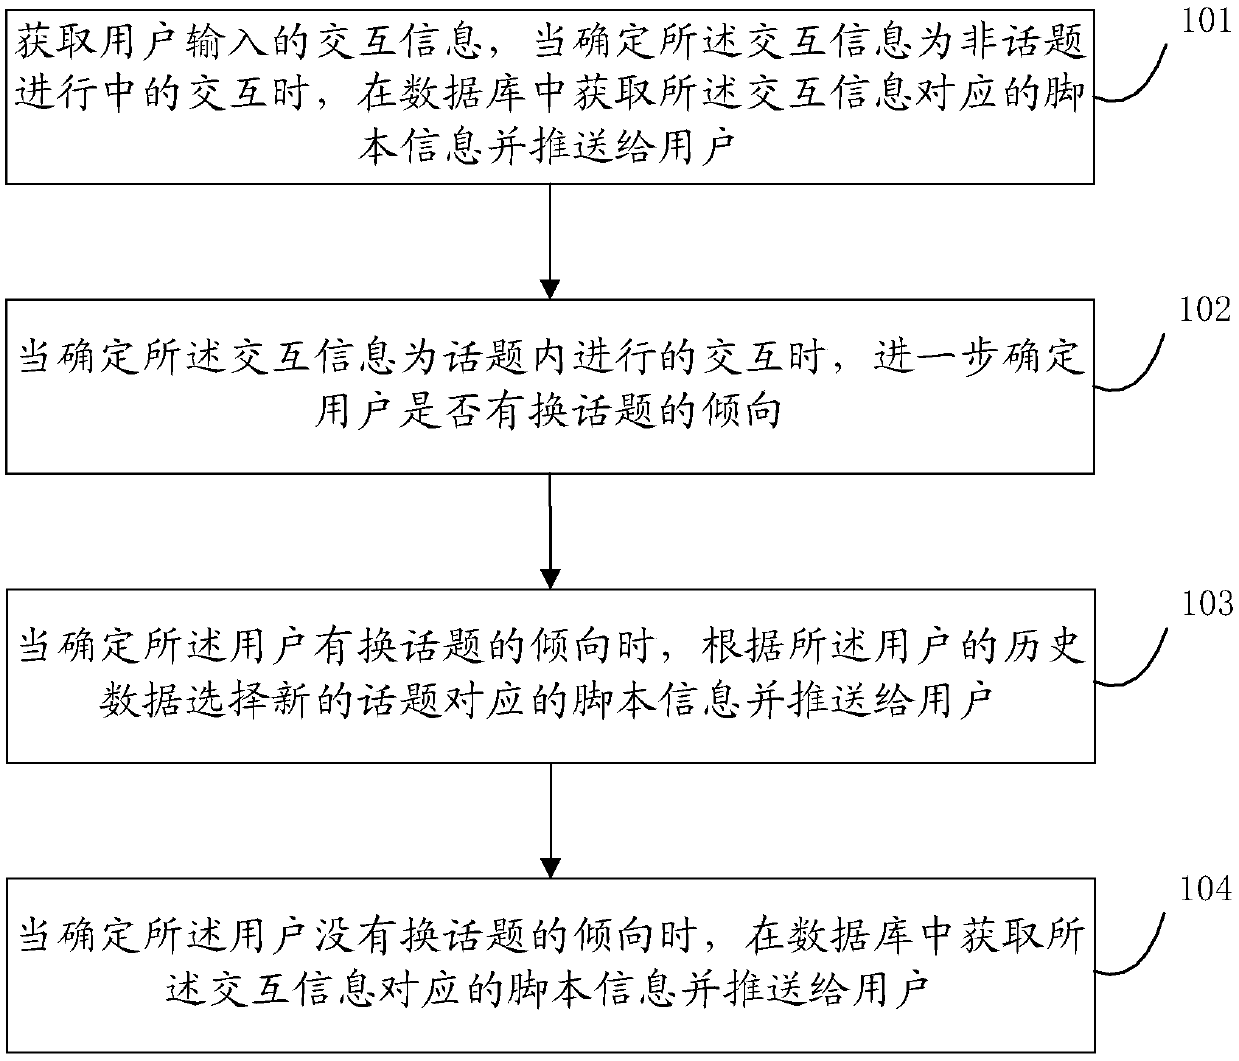 Dialogue control method and system